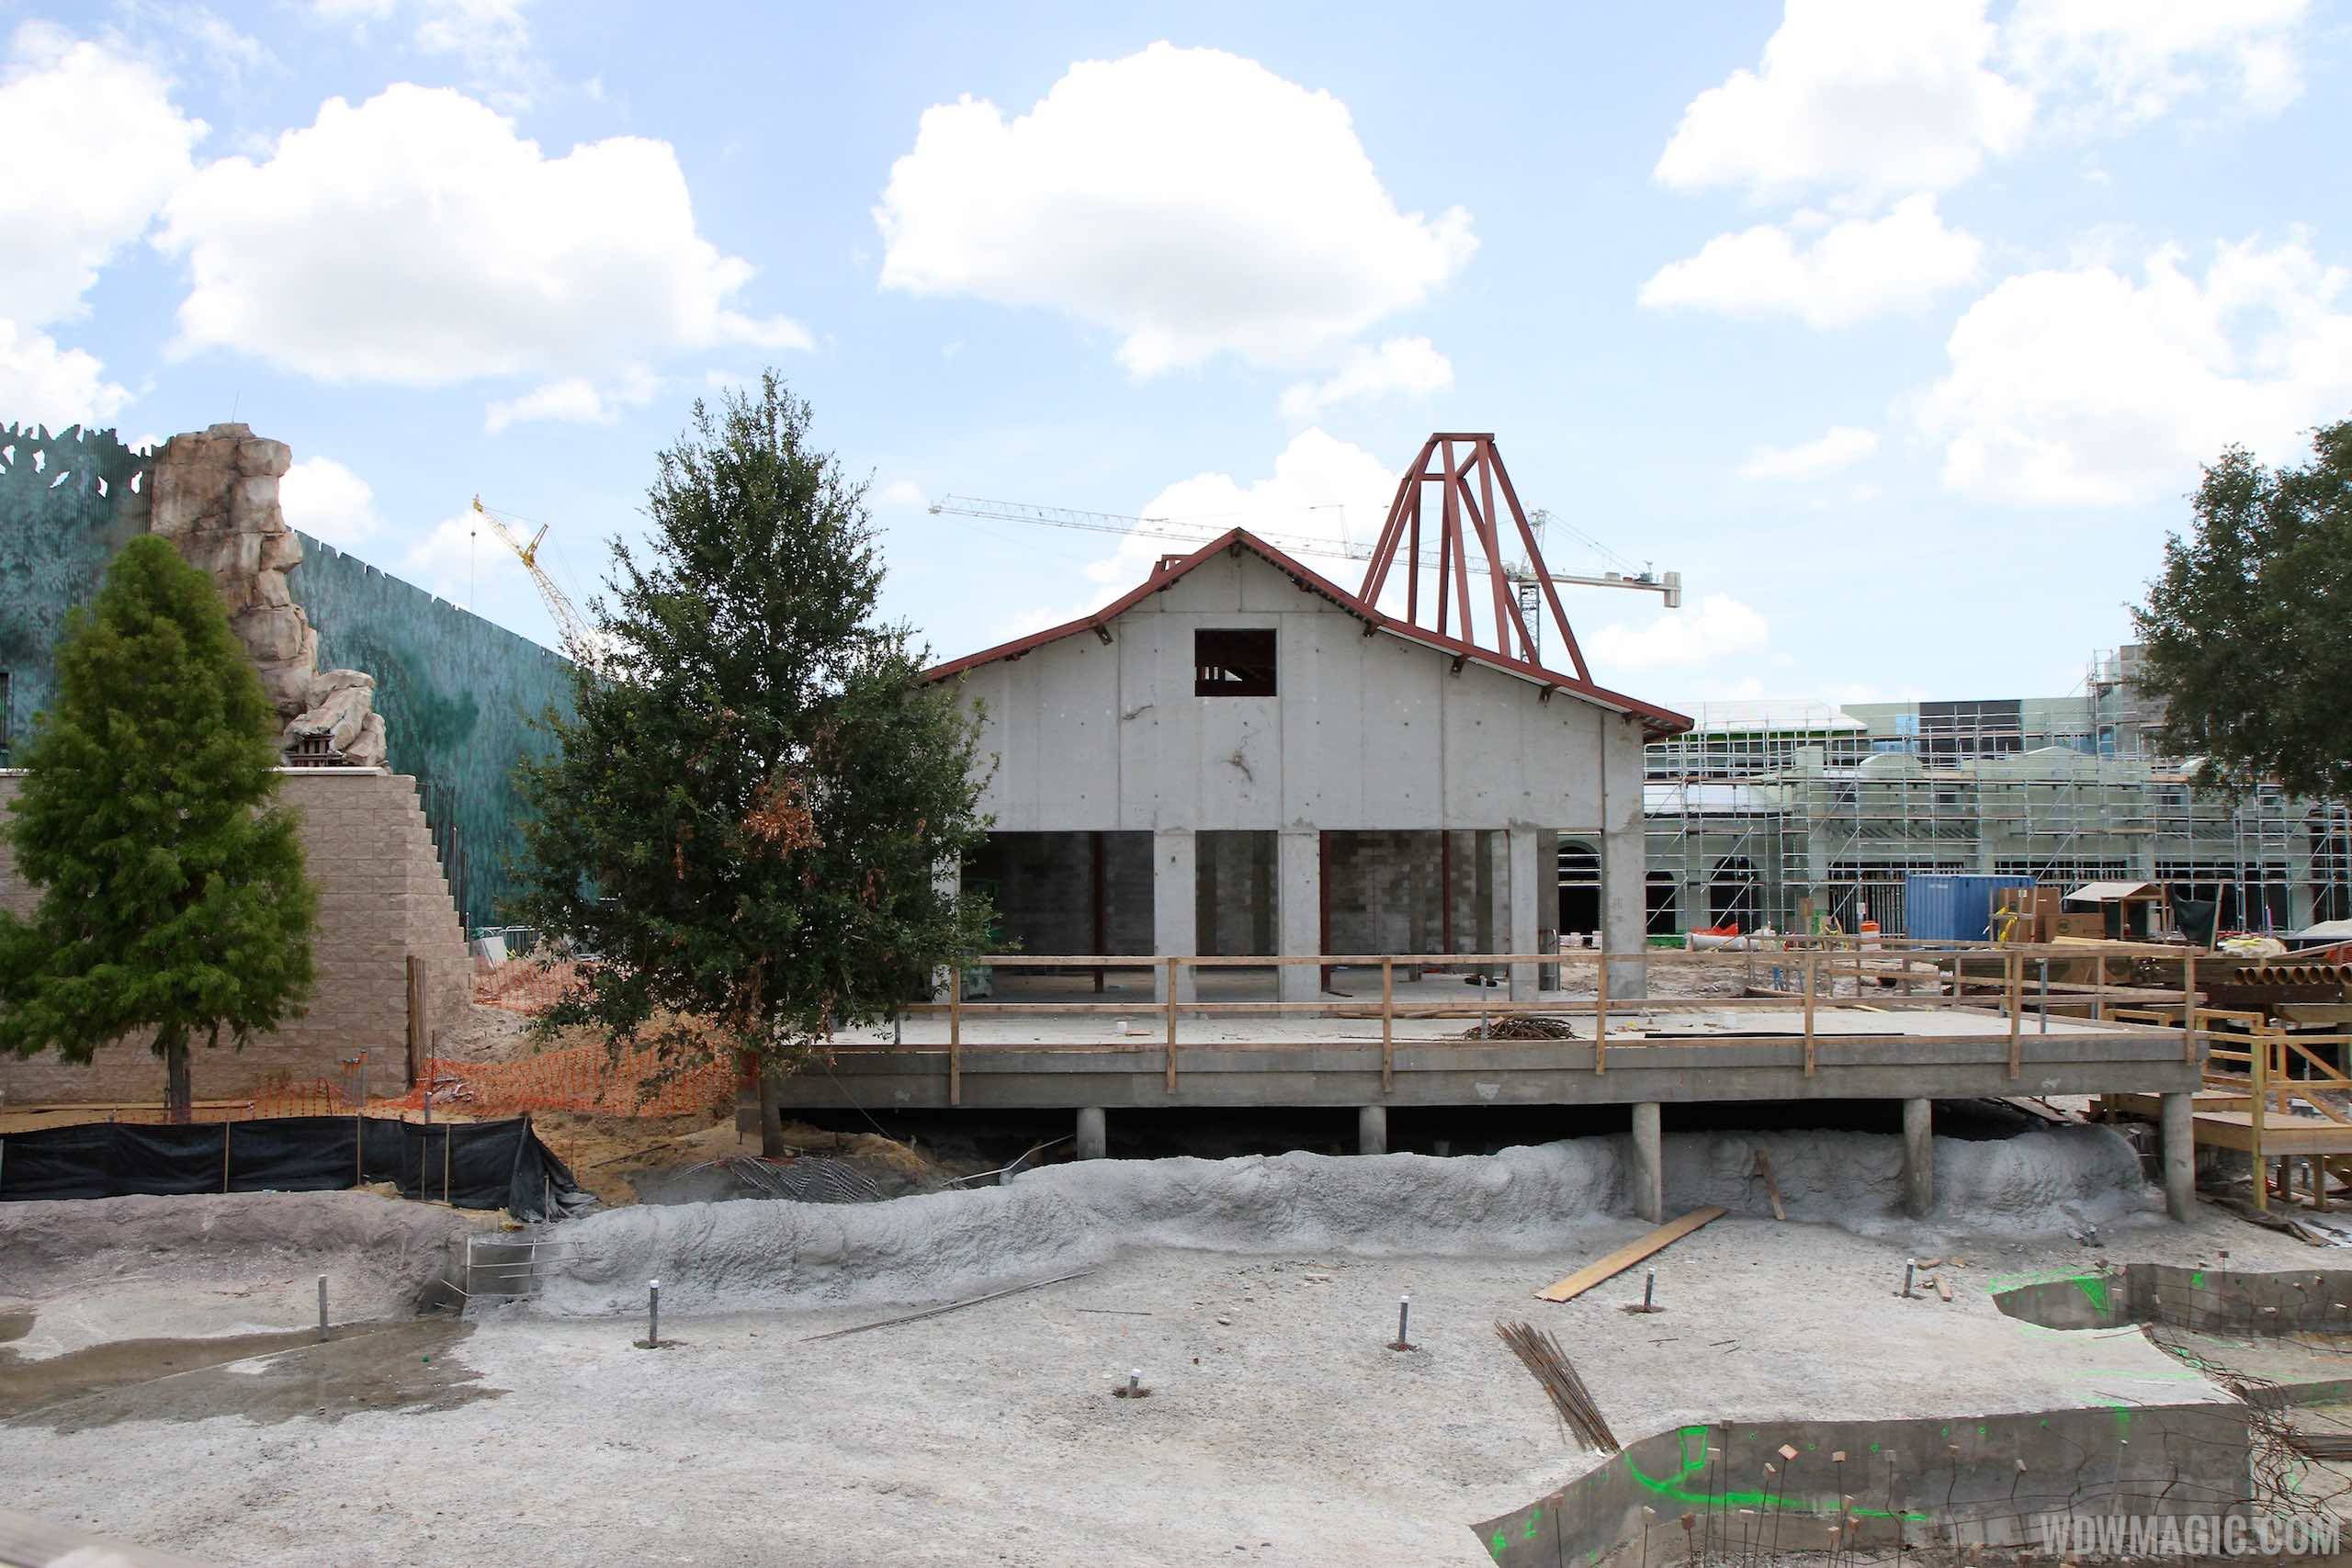 PHOTOS - Latest look at the construction of the Sprinkles cupcake bakery at Disney Springs